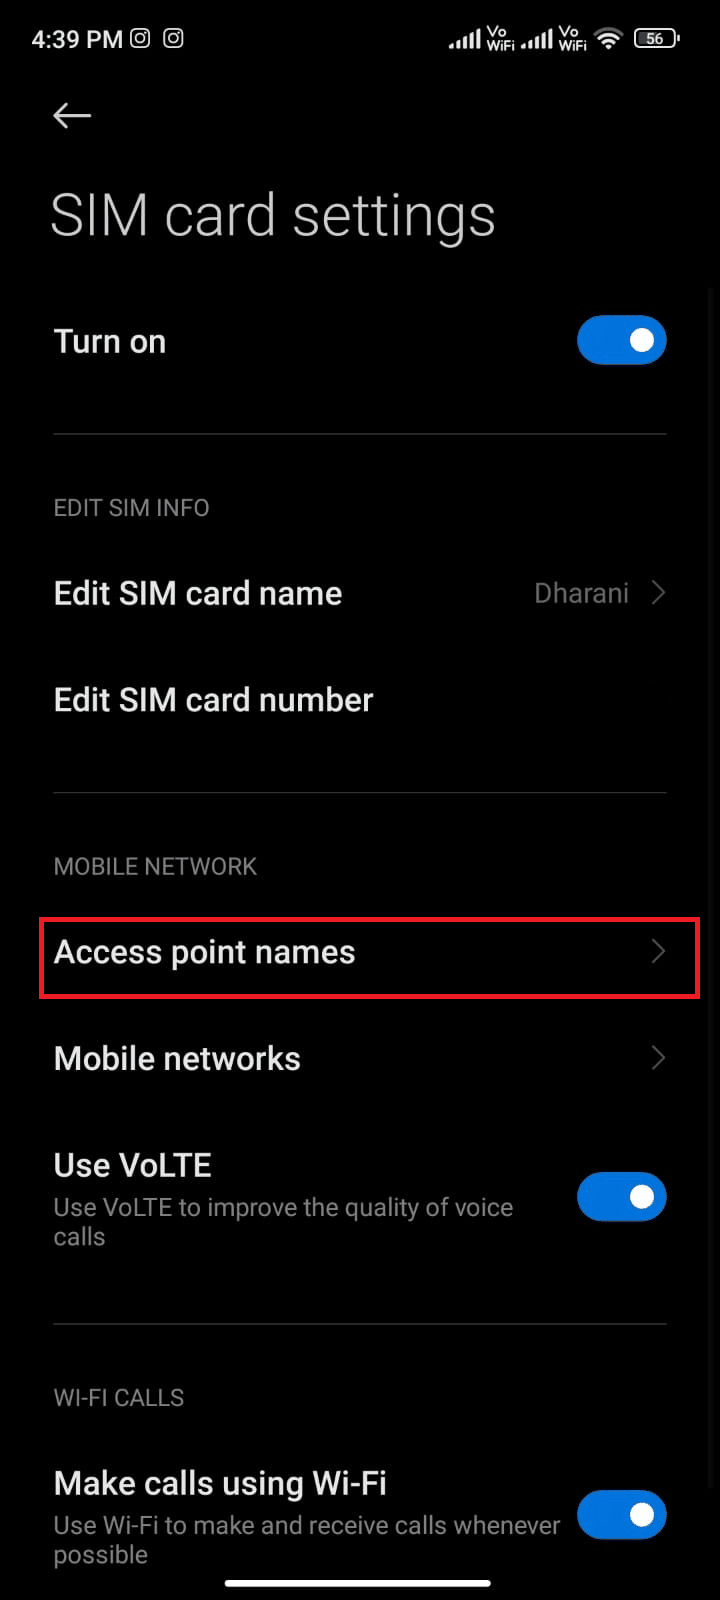 tap on Access point names